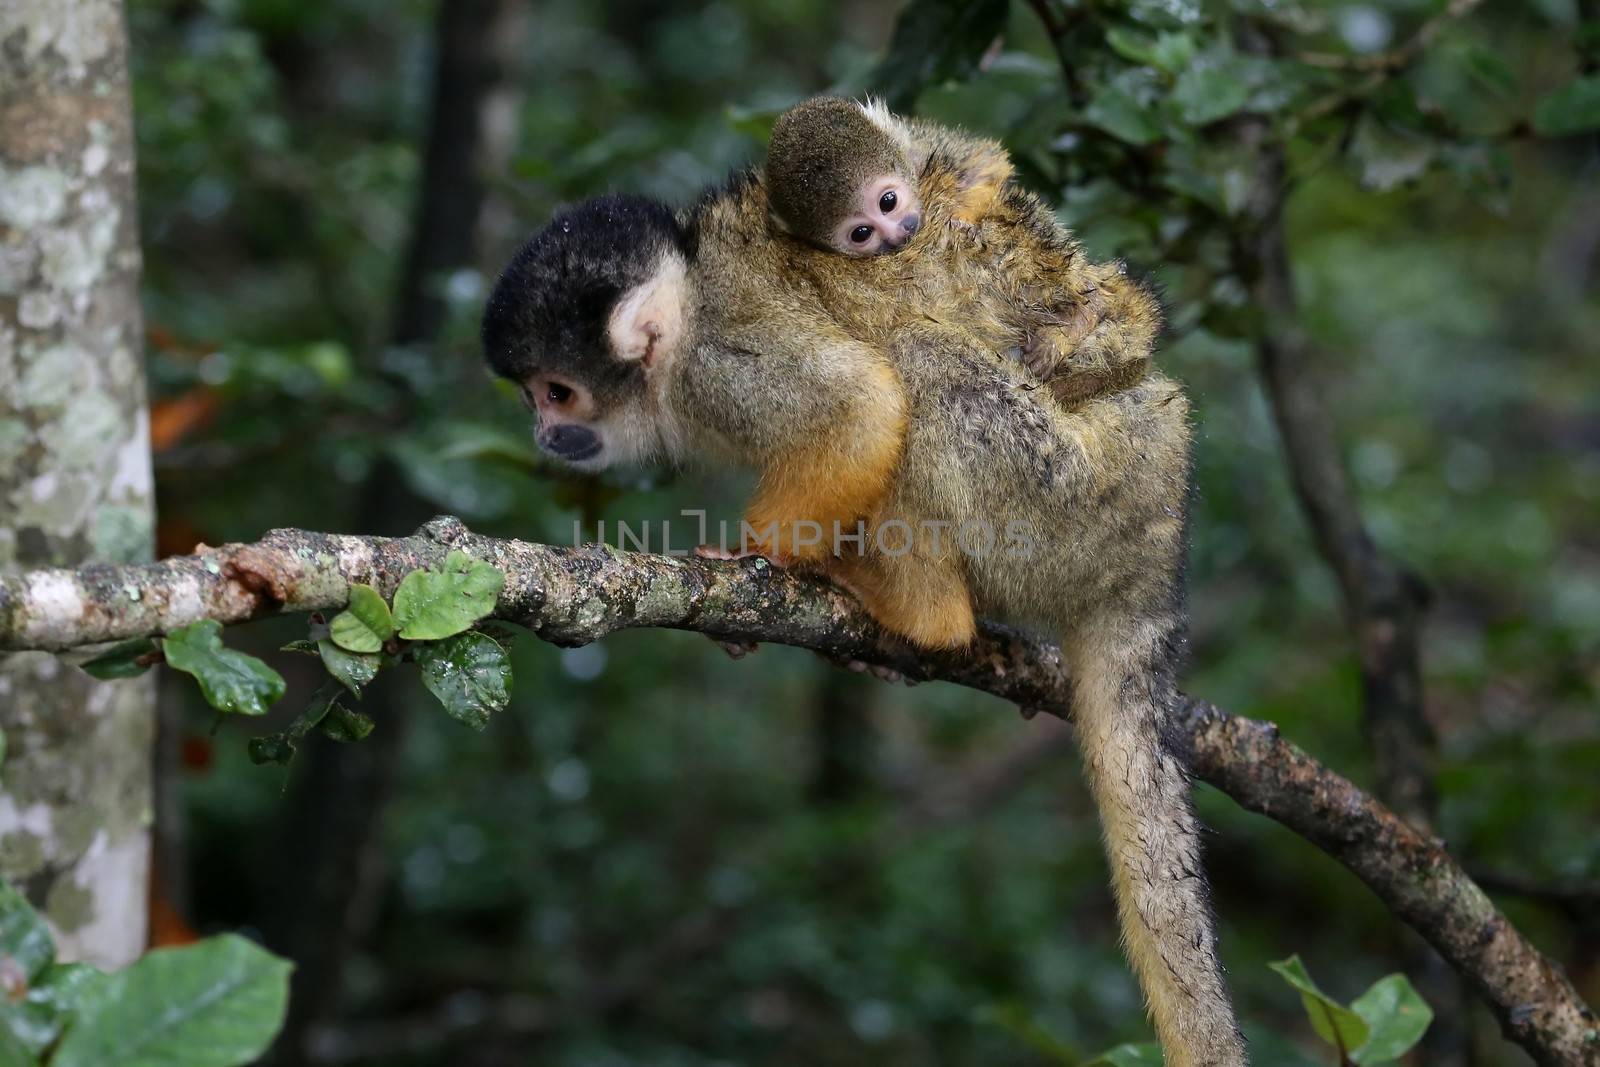 Baby squirrel monkey clinging to it's mothers back in the trees